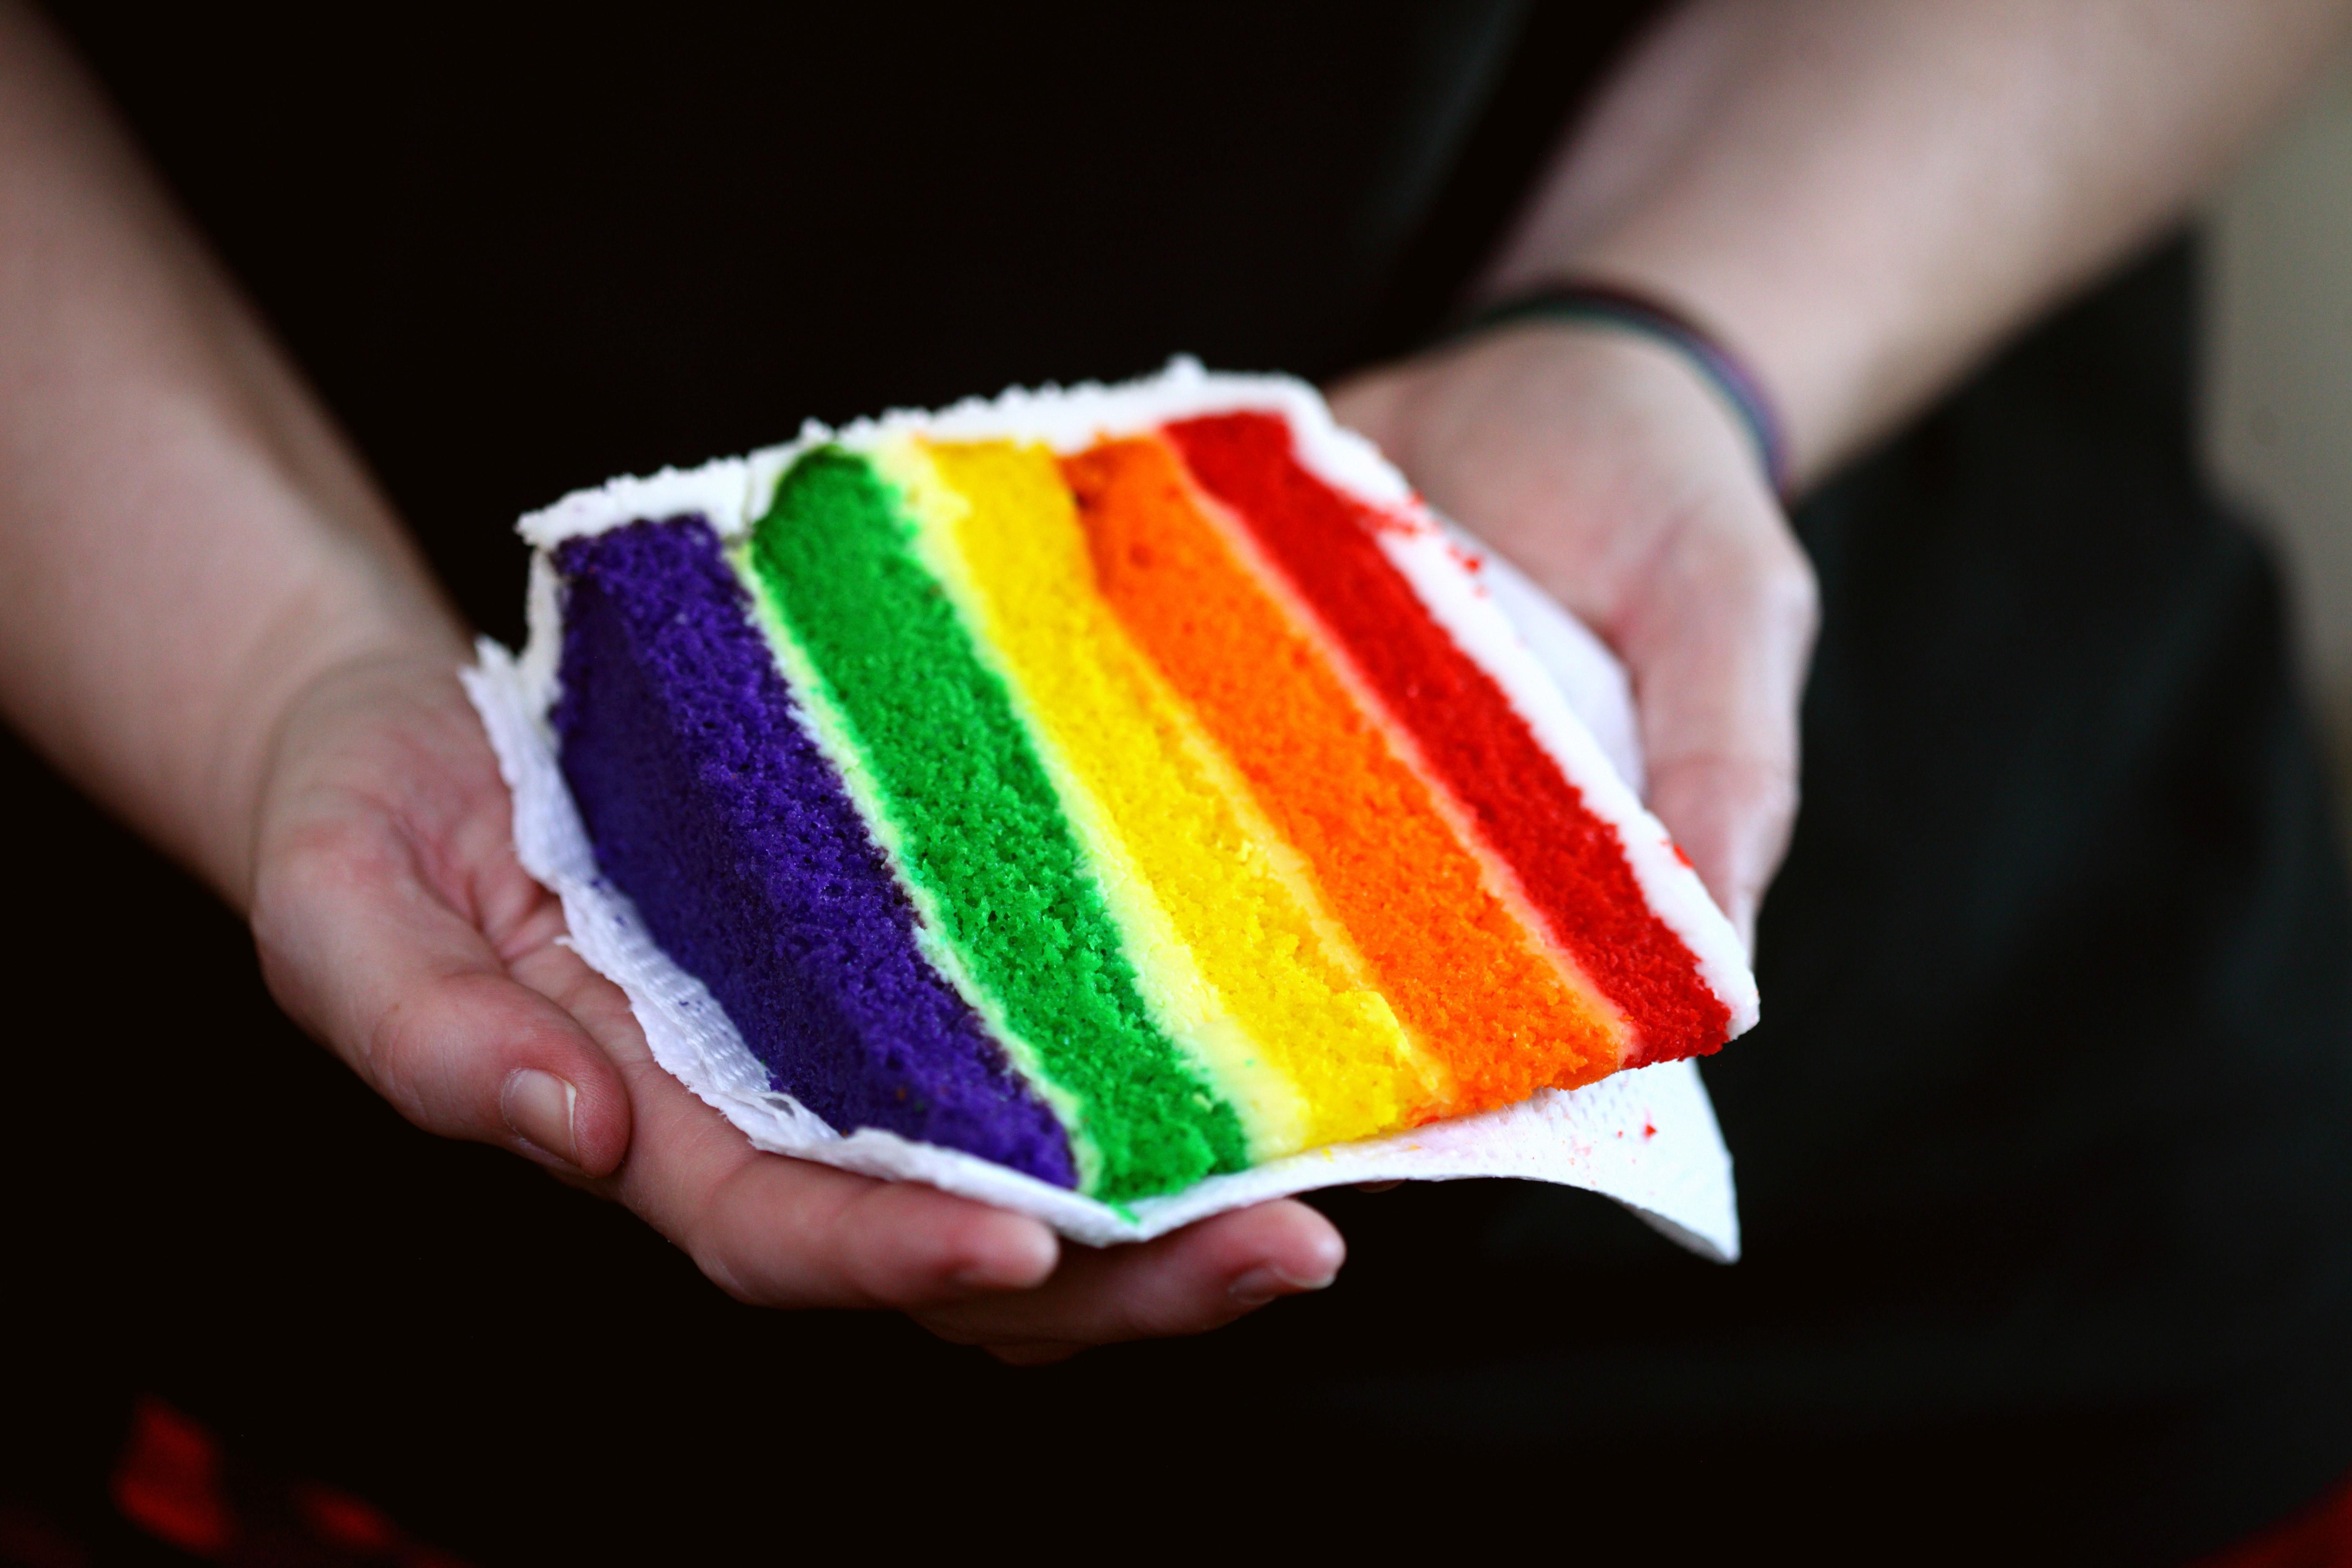 person holding a rainbow-layered cake.